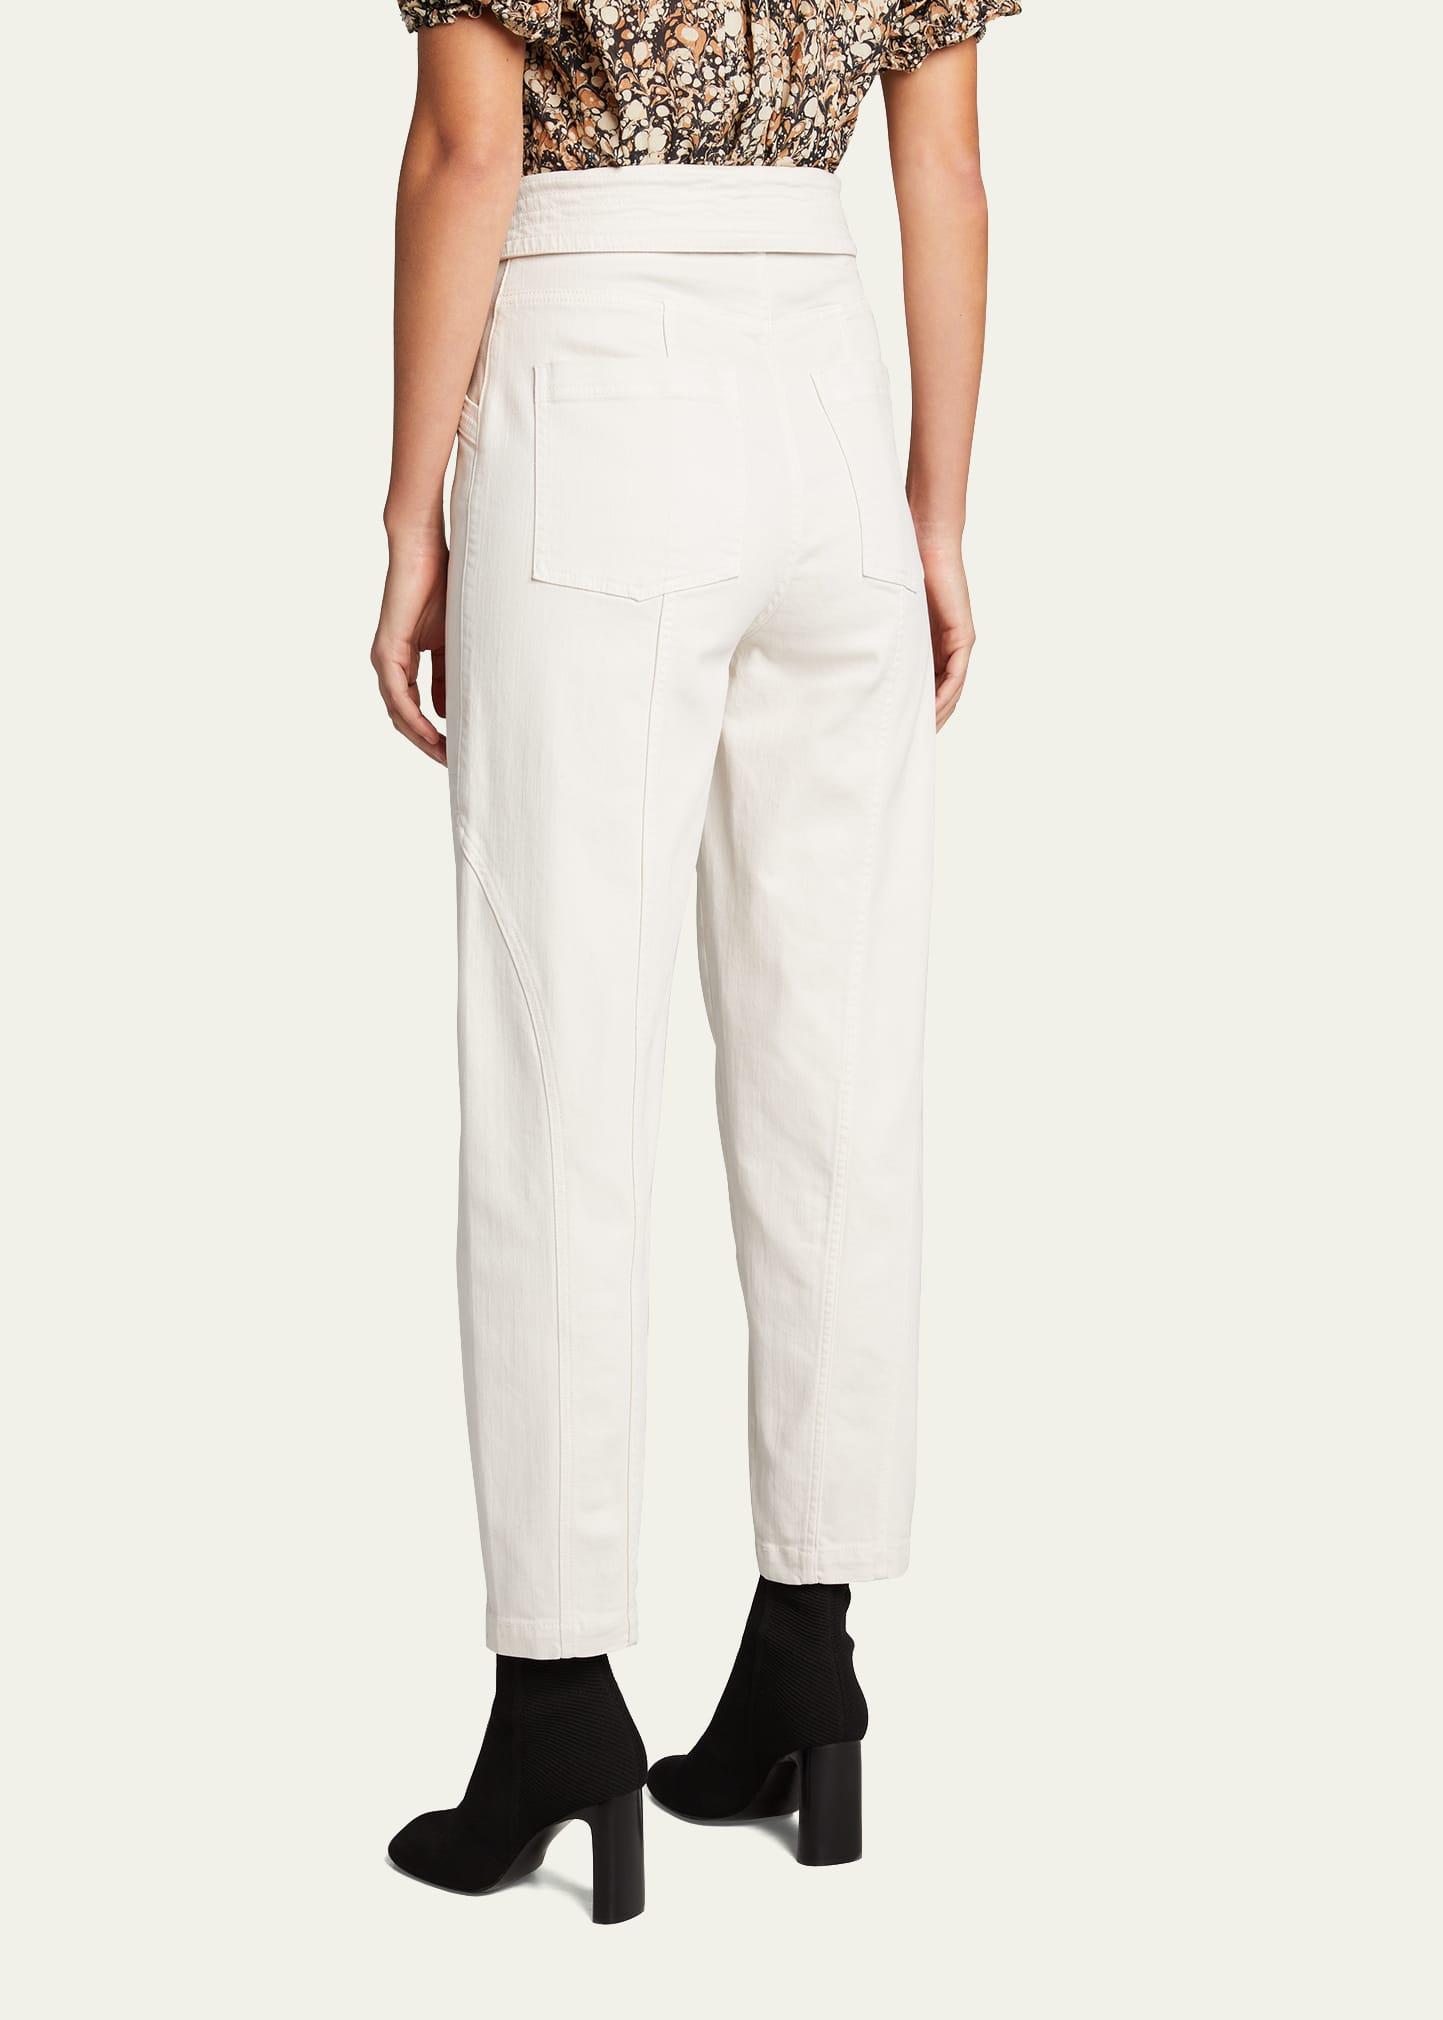 Ulla Johnson Otto Belted High-rise Jeans in Natural | Lyst